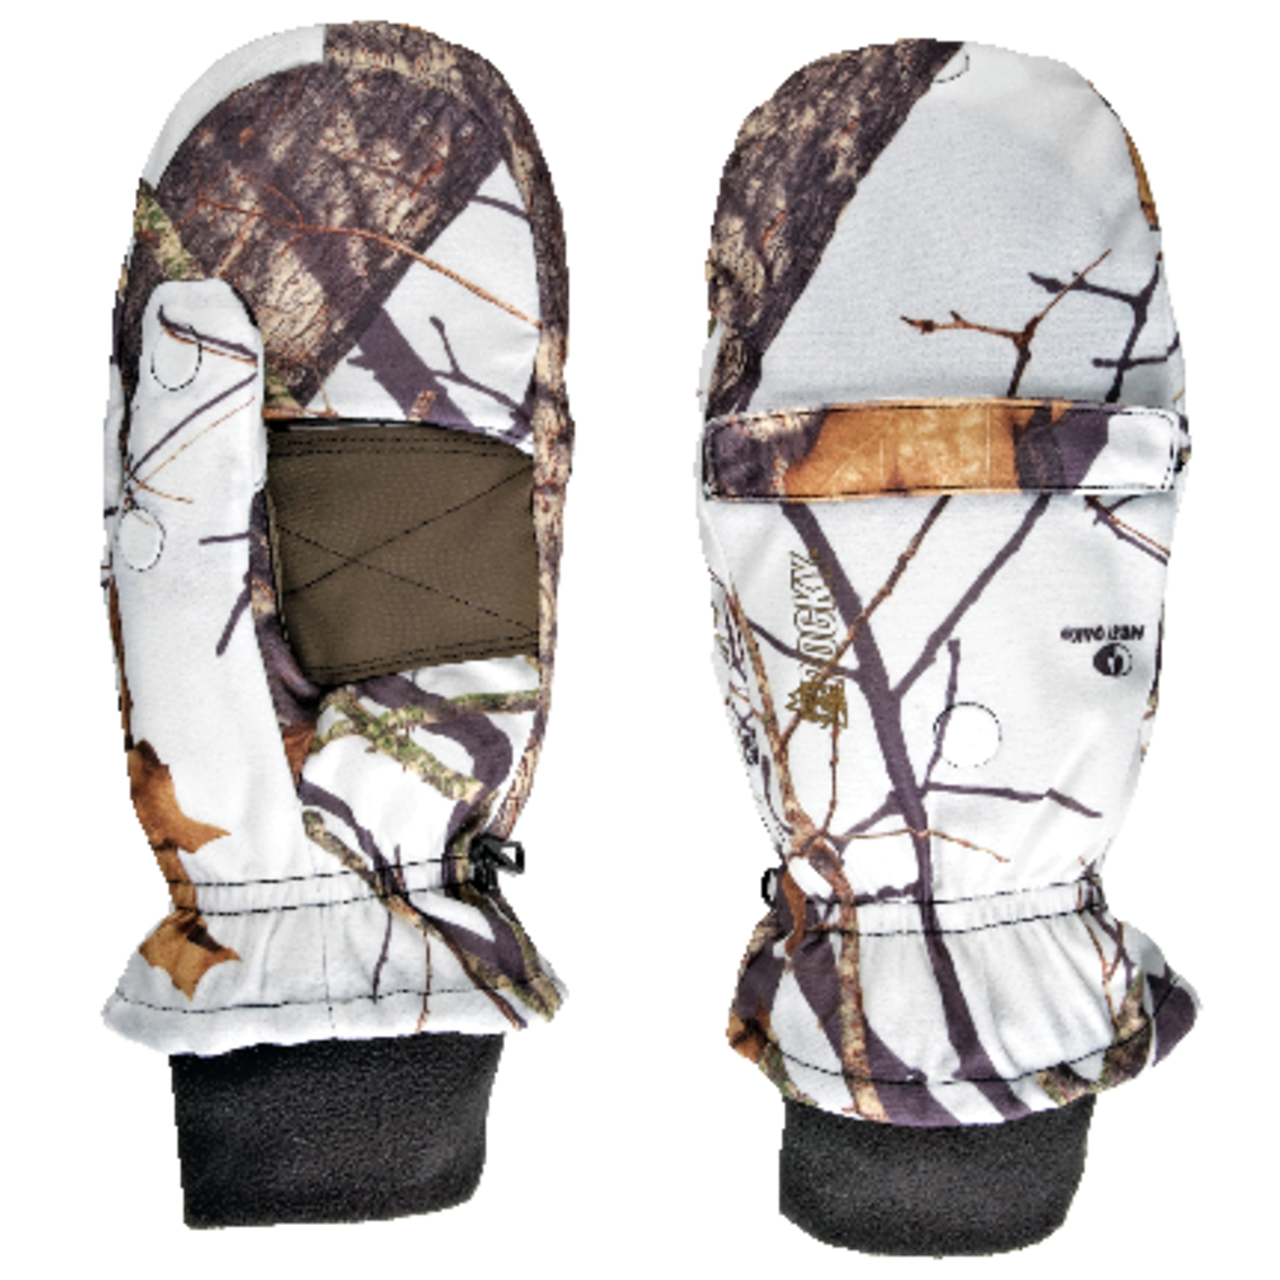 https://media-www.canadiantire.ca/product/playing/hunting/hunting-apparel-footwear/0757140/rocky-snow-camo-flip-mitt-large-cc8692f9-e74c-42cc-9163-5bc7de8f5d0f.png?imdensity=1&imwidth=640&impolicy=mZoom